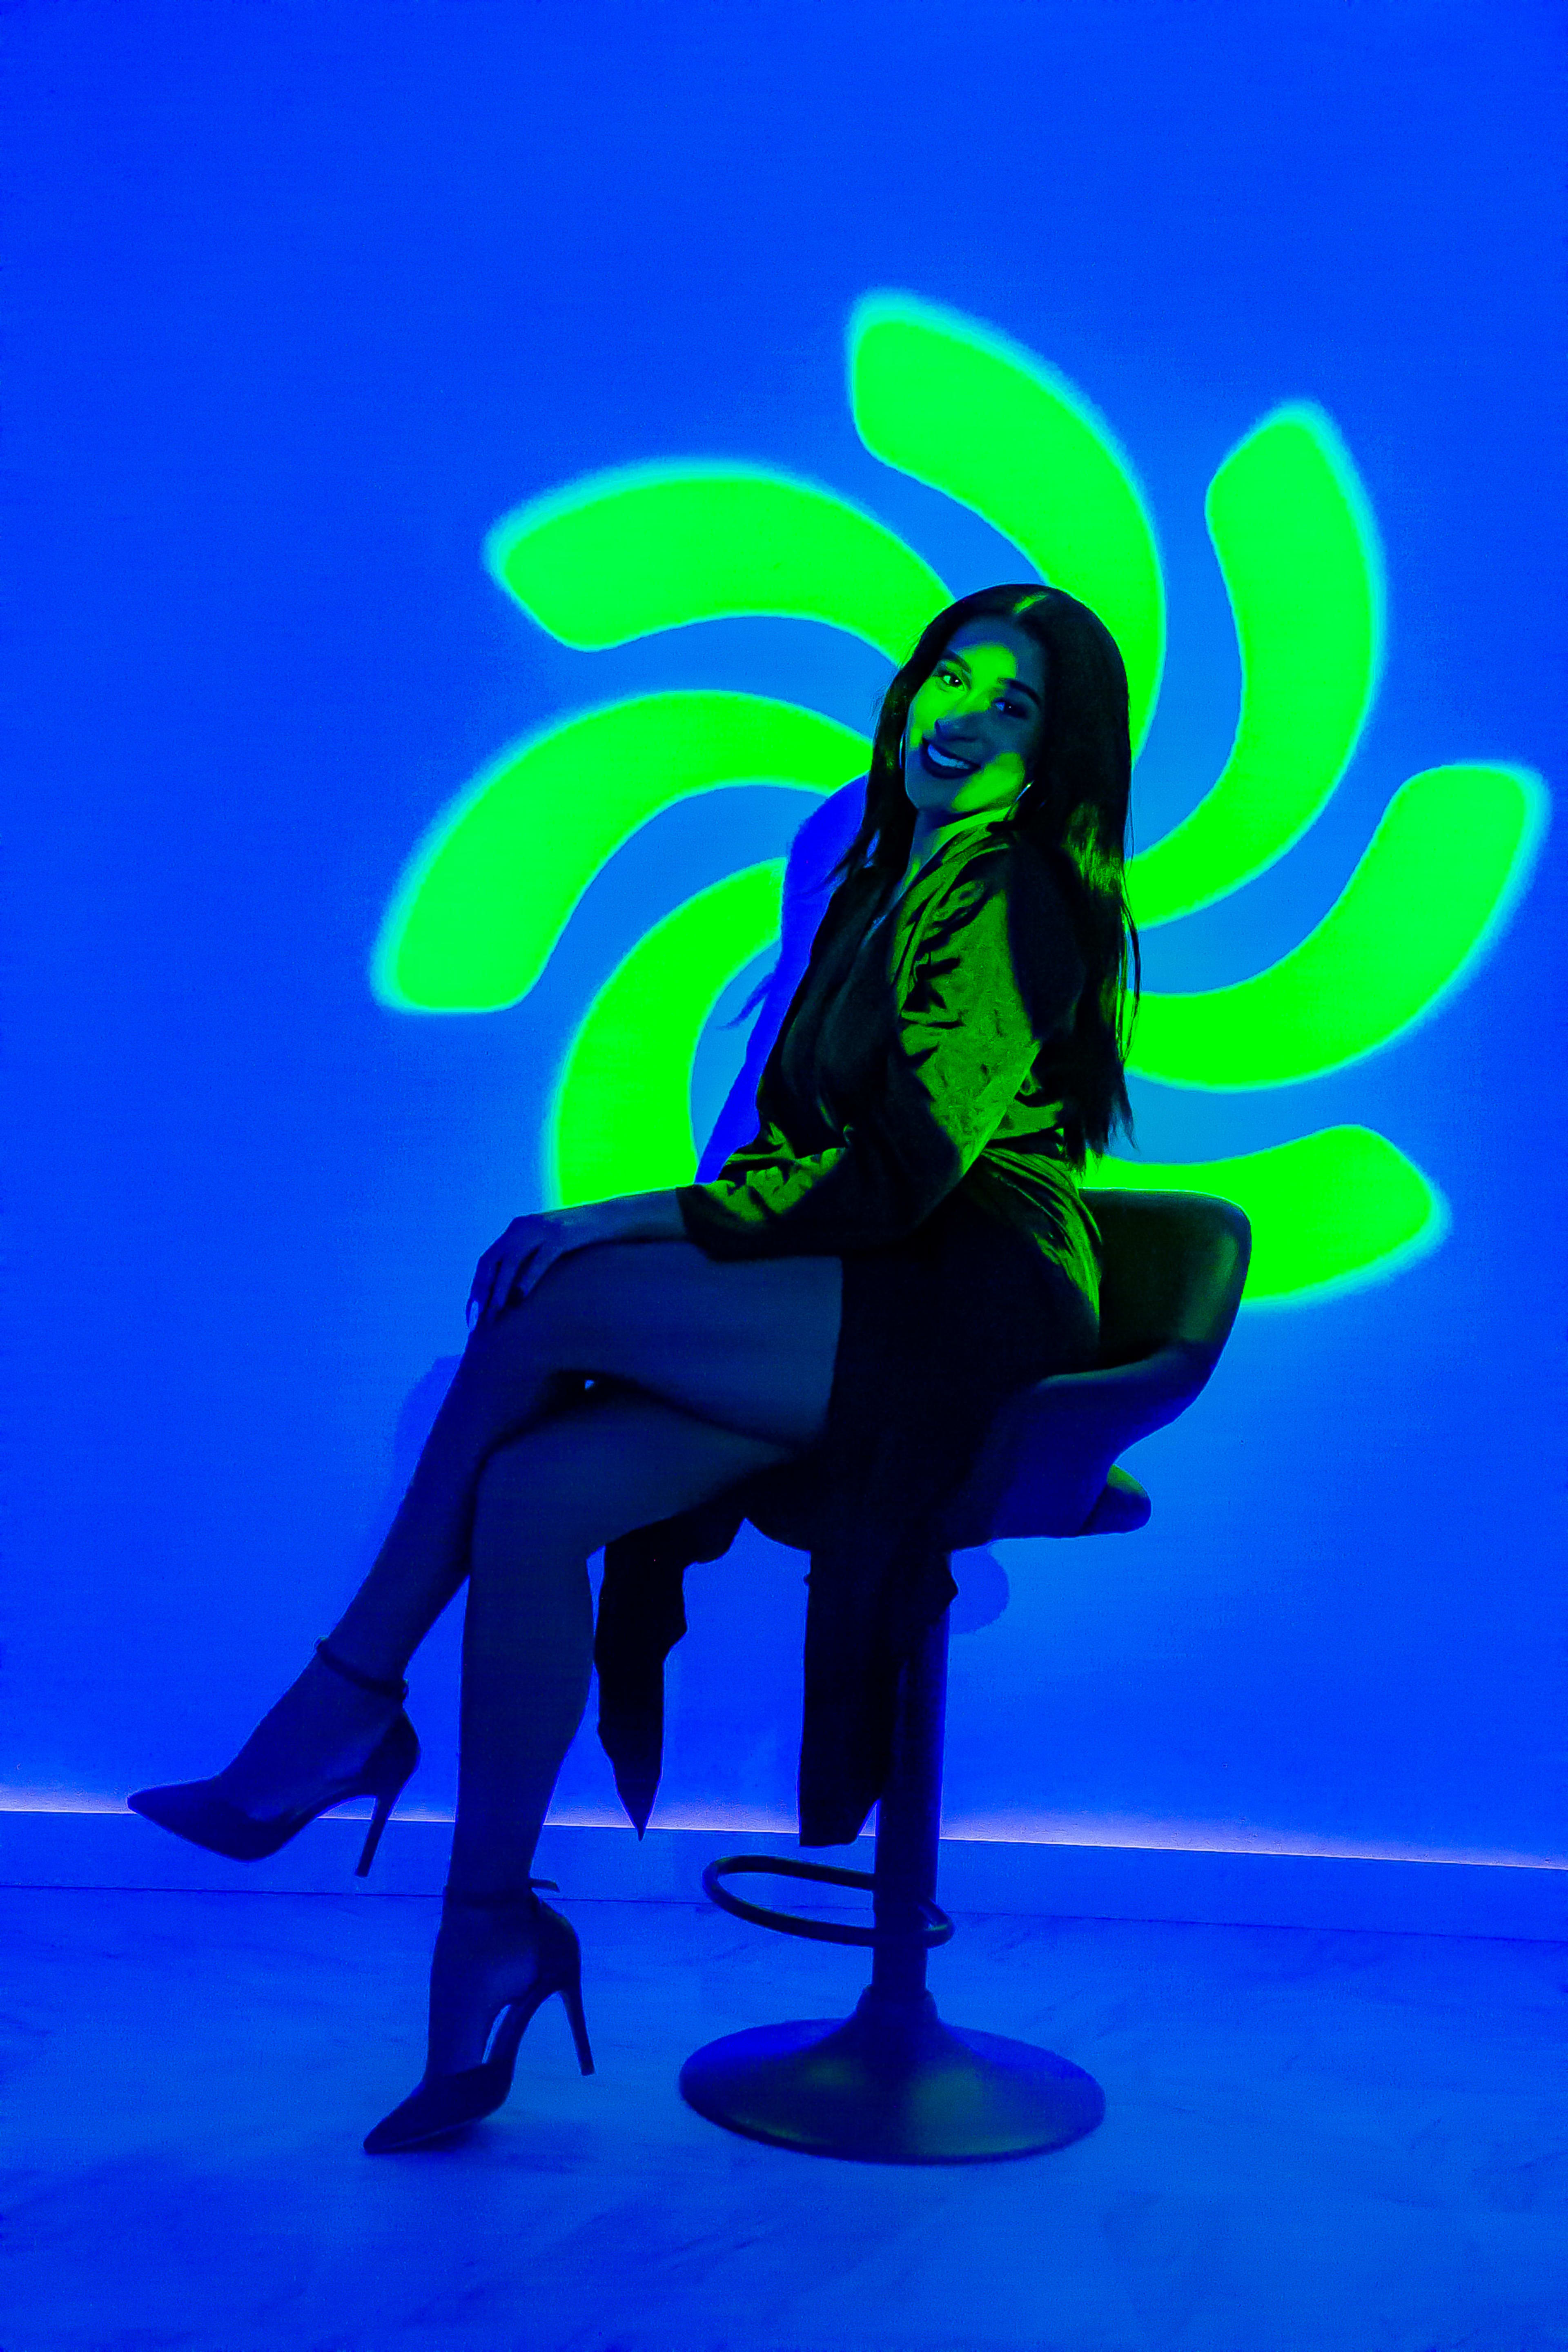 A fashion photo shoot of a woman on a chair in front of a neon blue wall.